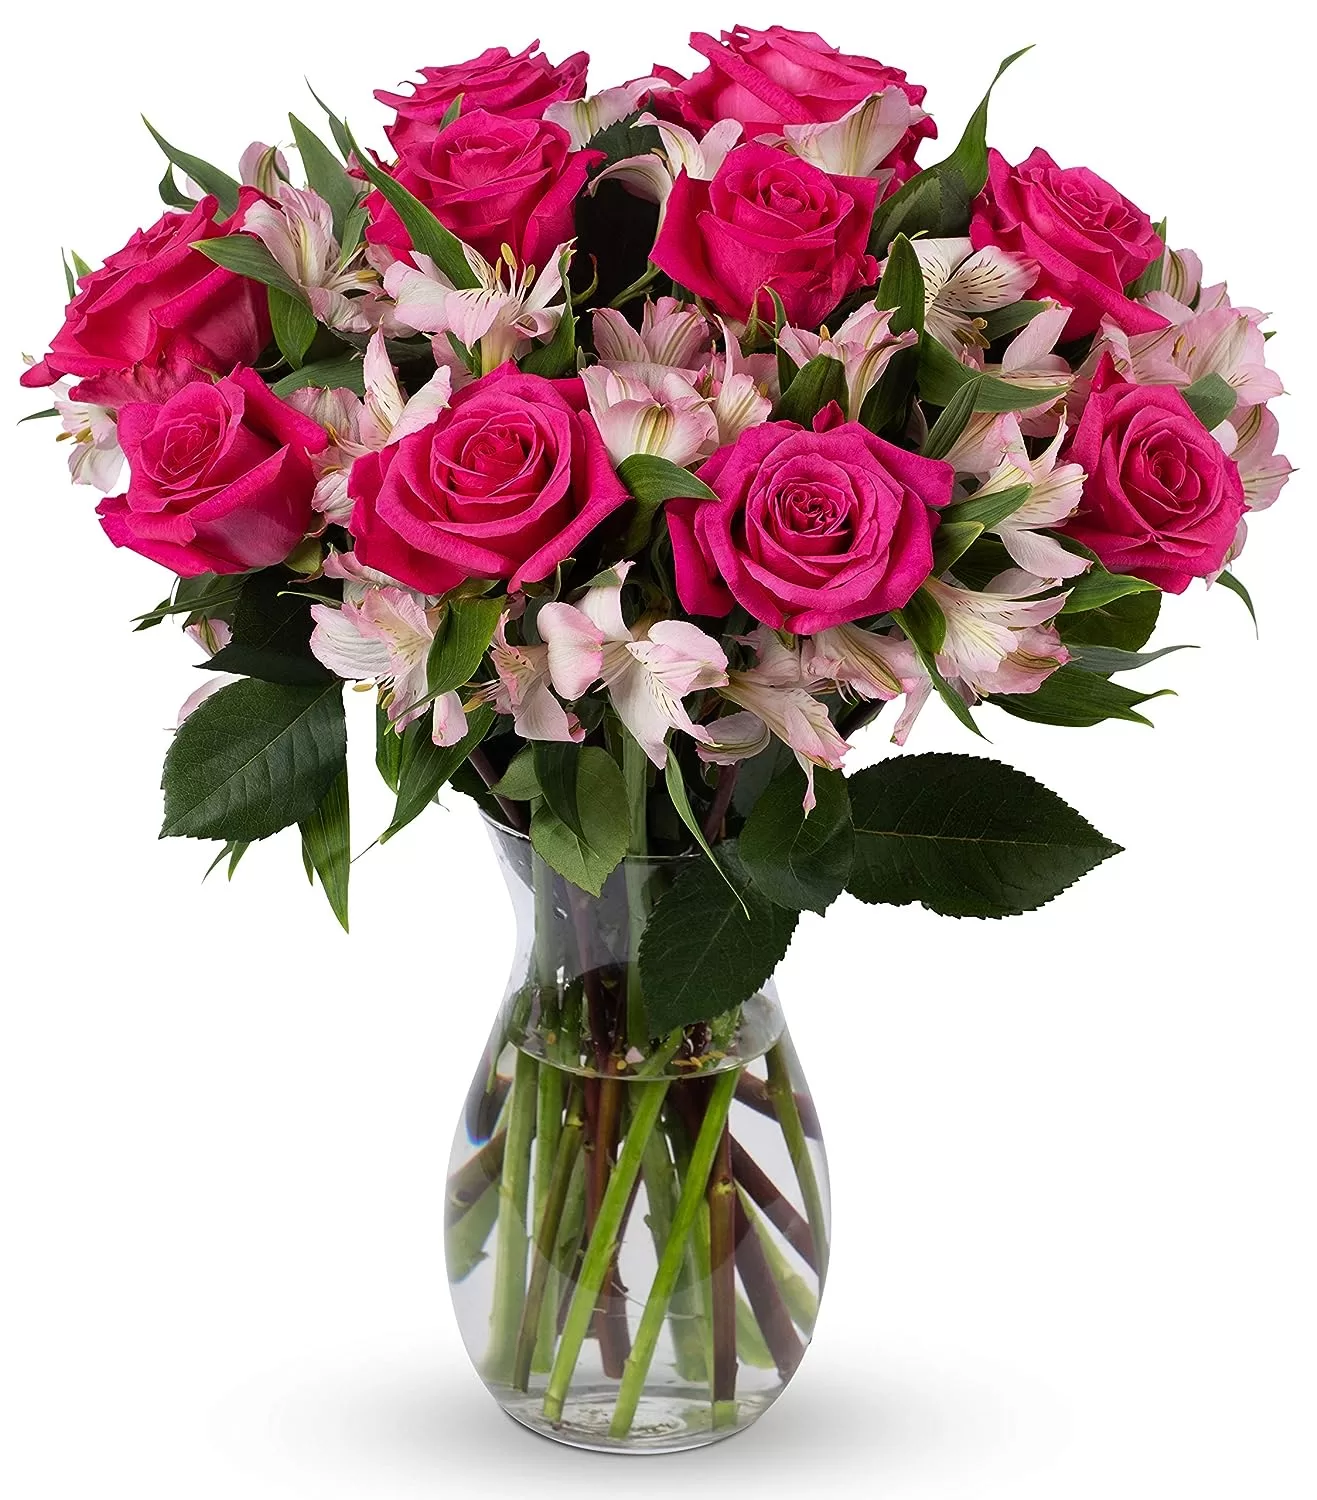 An arrangement of red and pink flowers from Amazon Flower Delivery